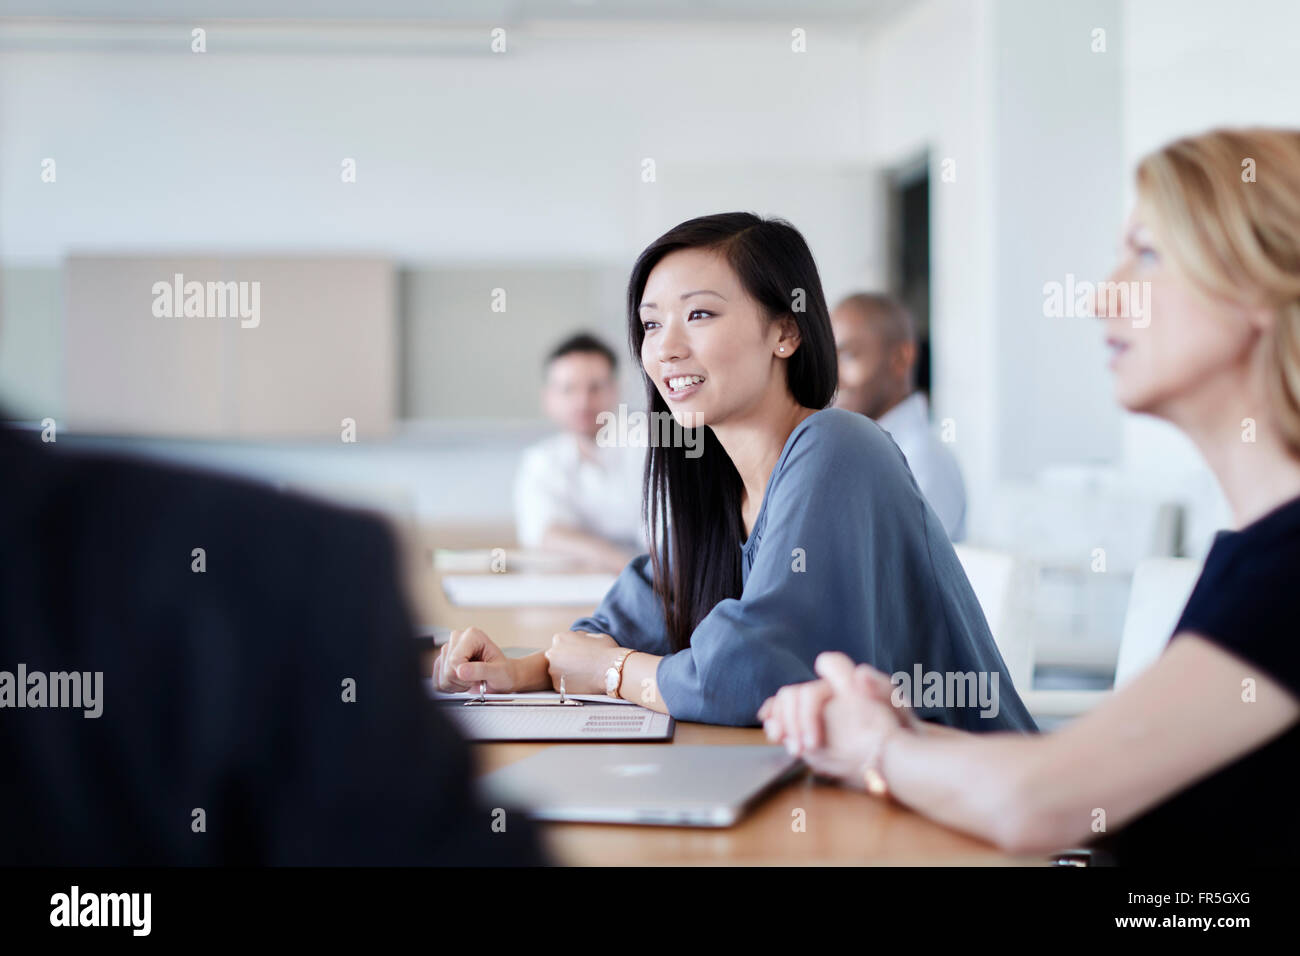 Smiling businesswoman in meeting Banque D'Images